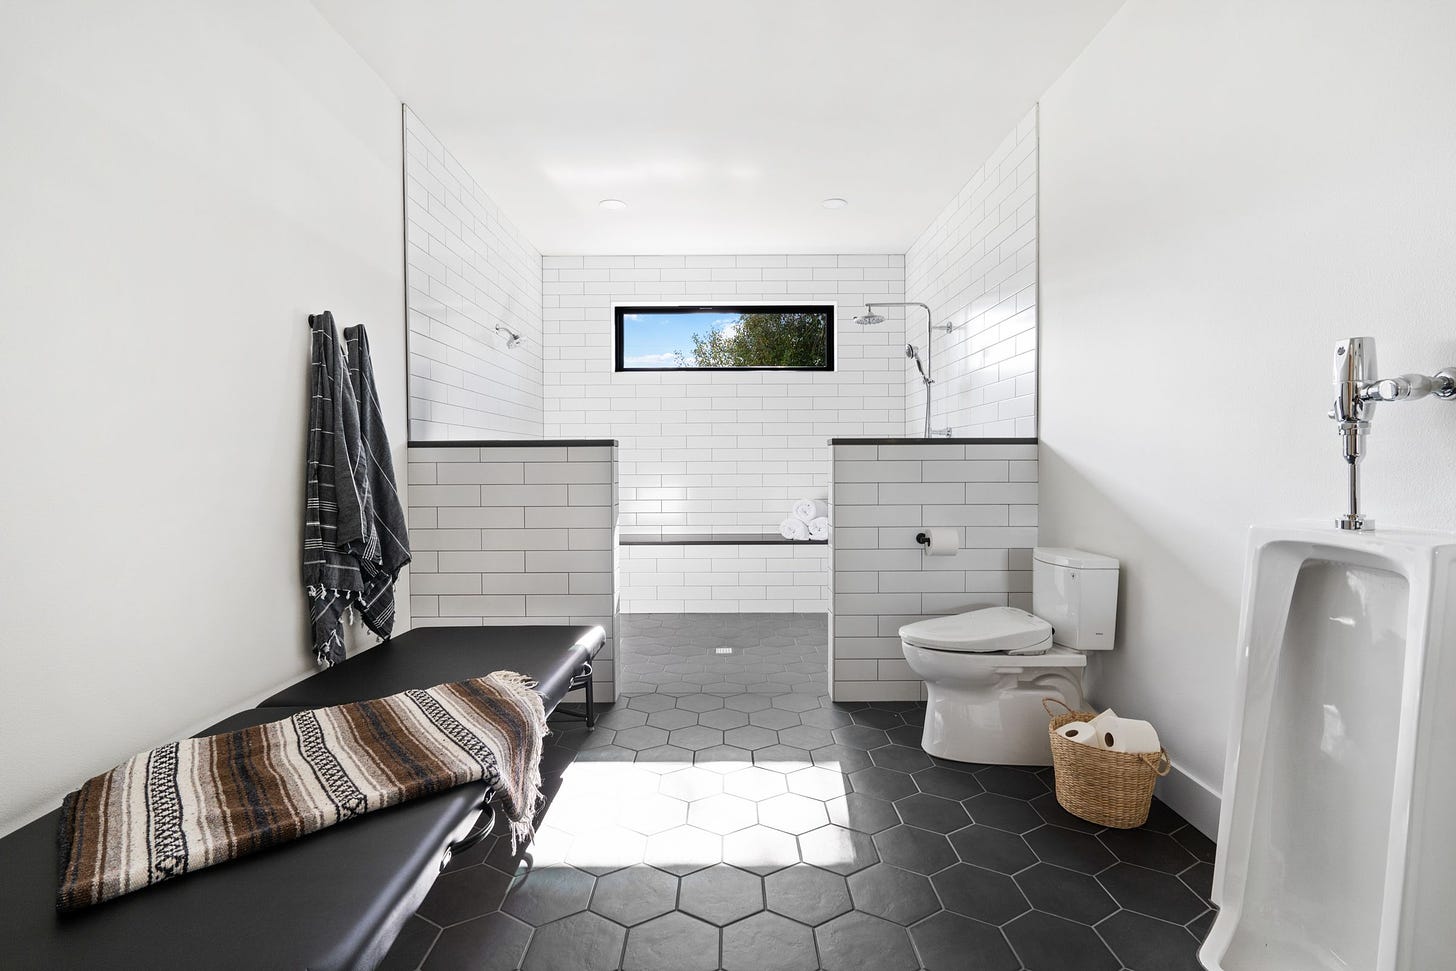 White subway tiles panel a roll-in shower. A bench holds rolled white towels inn the background while a window shows a pop of blue sky. In the foreground, a black mat bench topped with a brown southwest style blanket. On the right, a toilet and a urinal with plenty of open space. 